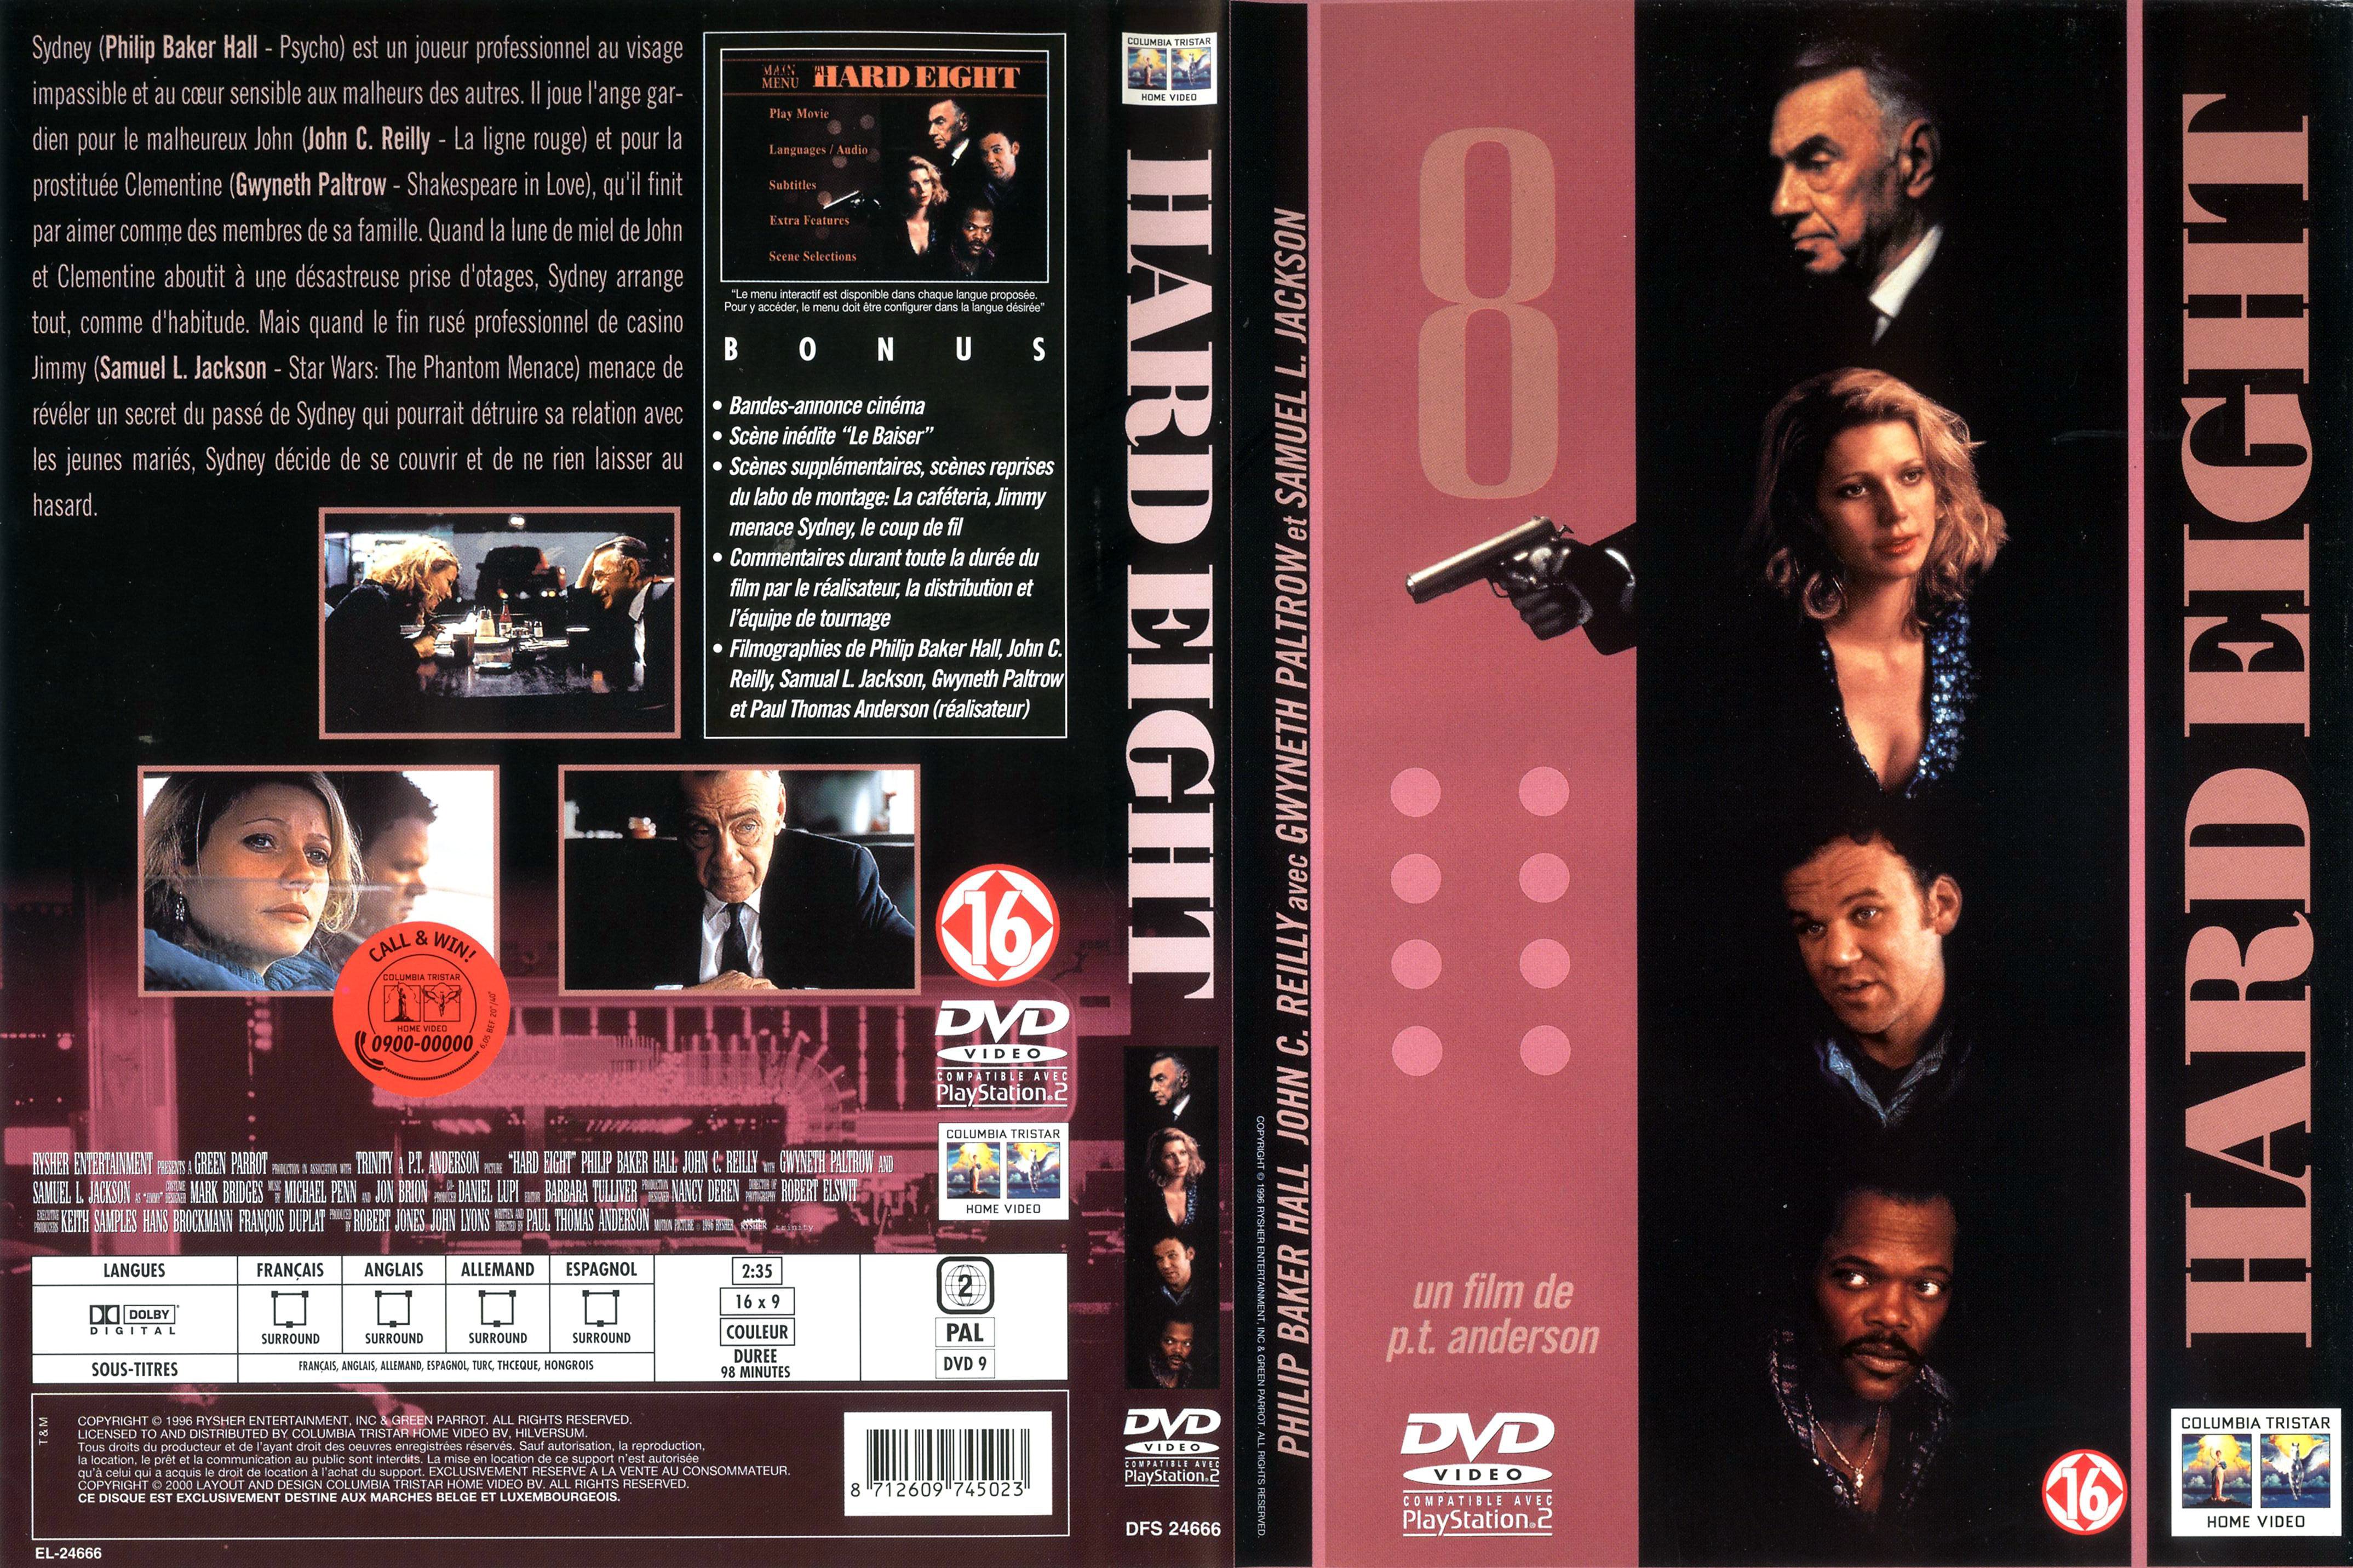 Jaquette DVD Hard eight v2